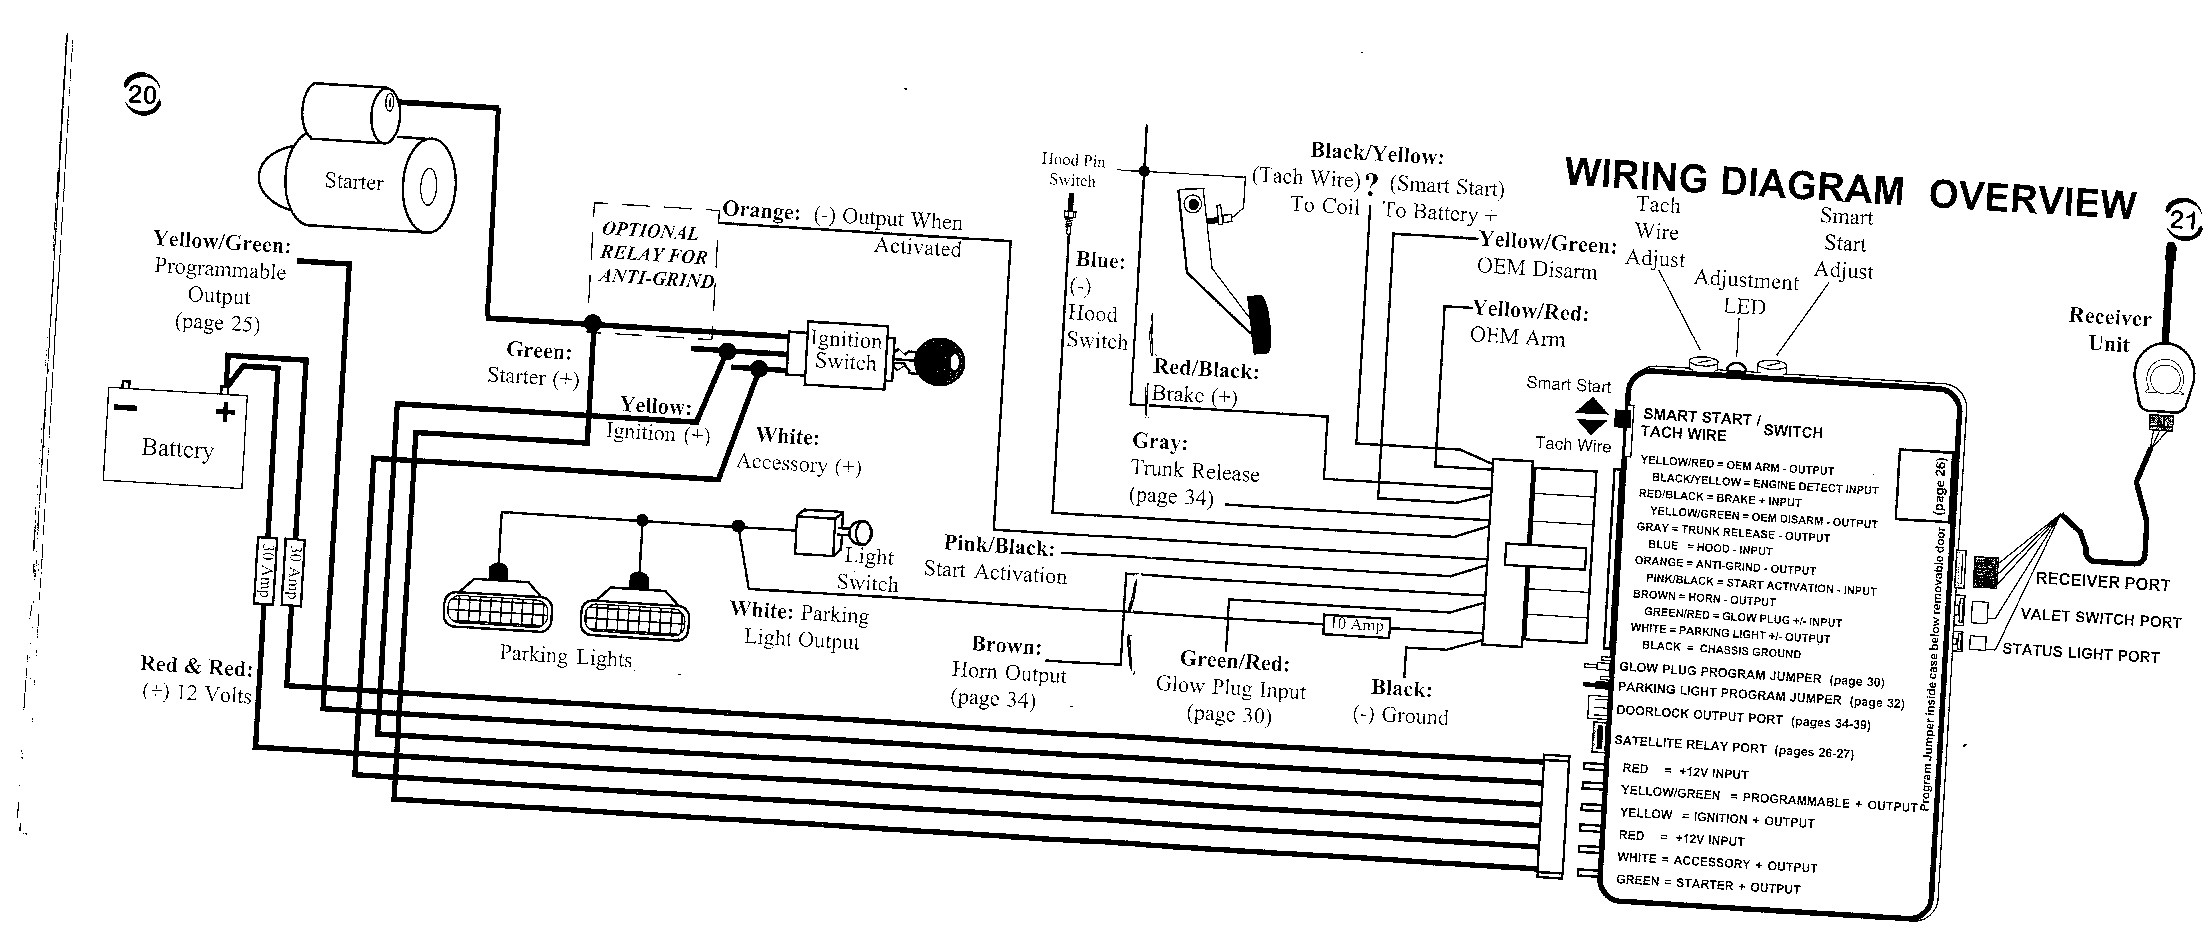 Viper Winch Wiring Diagram from mainetreasurechest.com